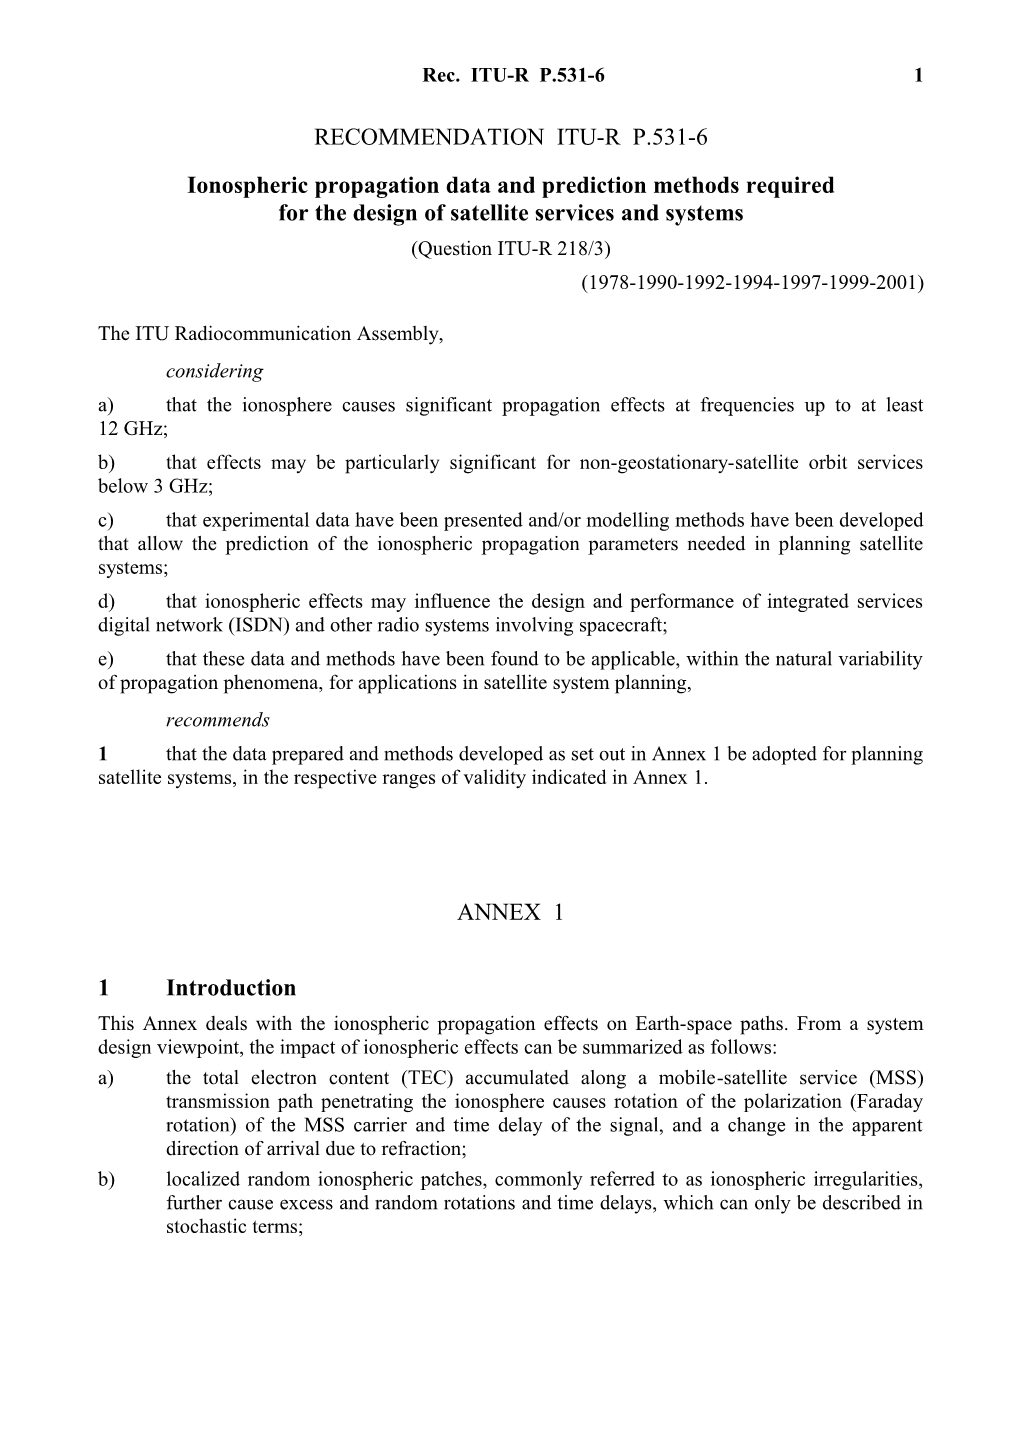 RECOMMENDATION ITU-R P.531-6 - Ionospheric Propagation Data and Prediction Methods Required